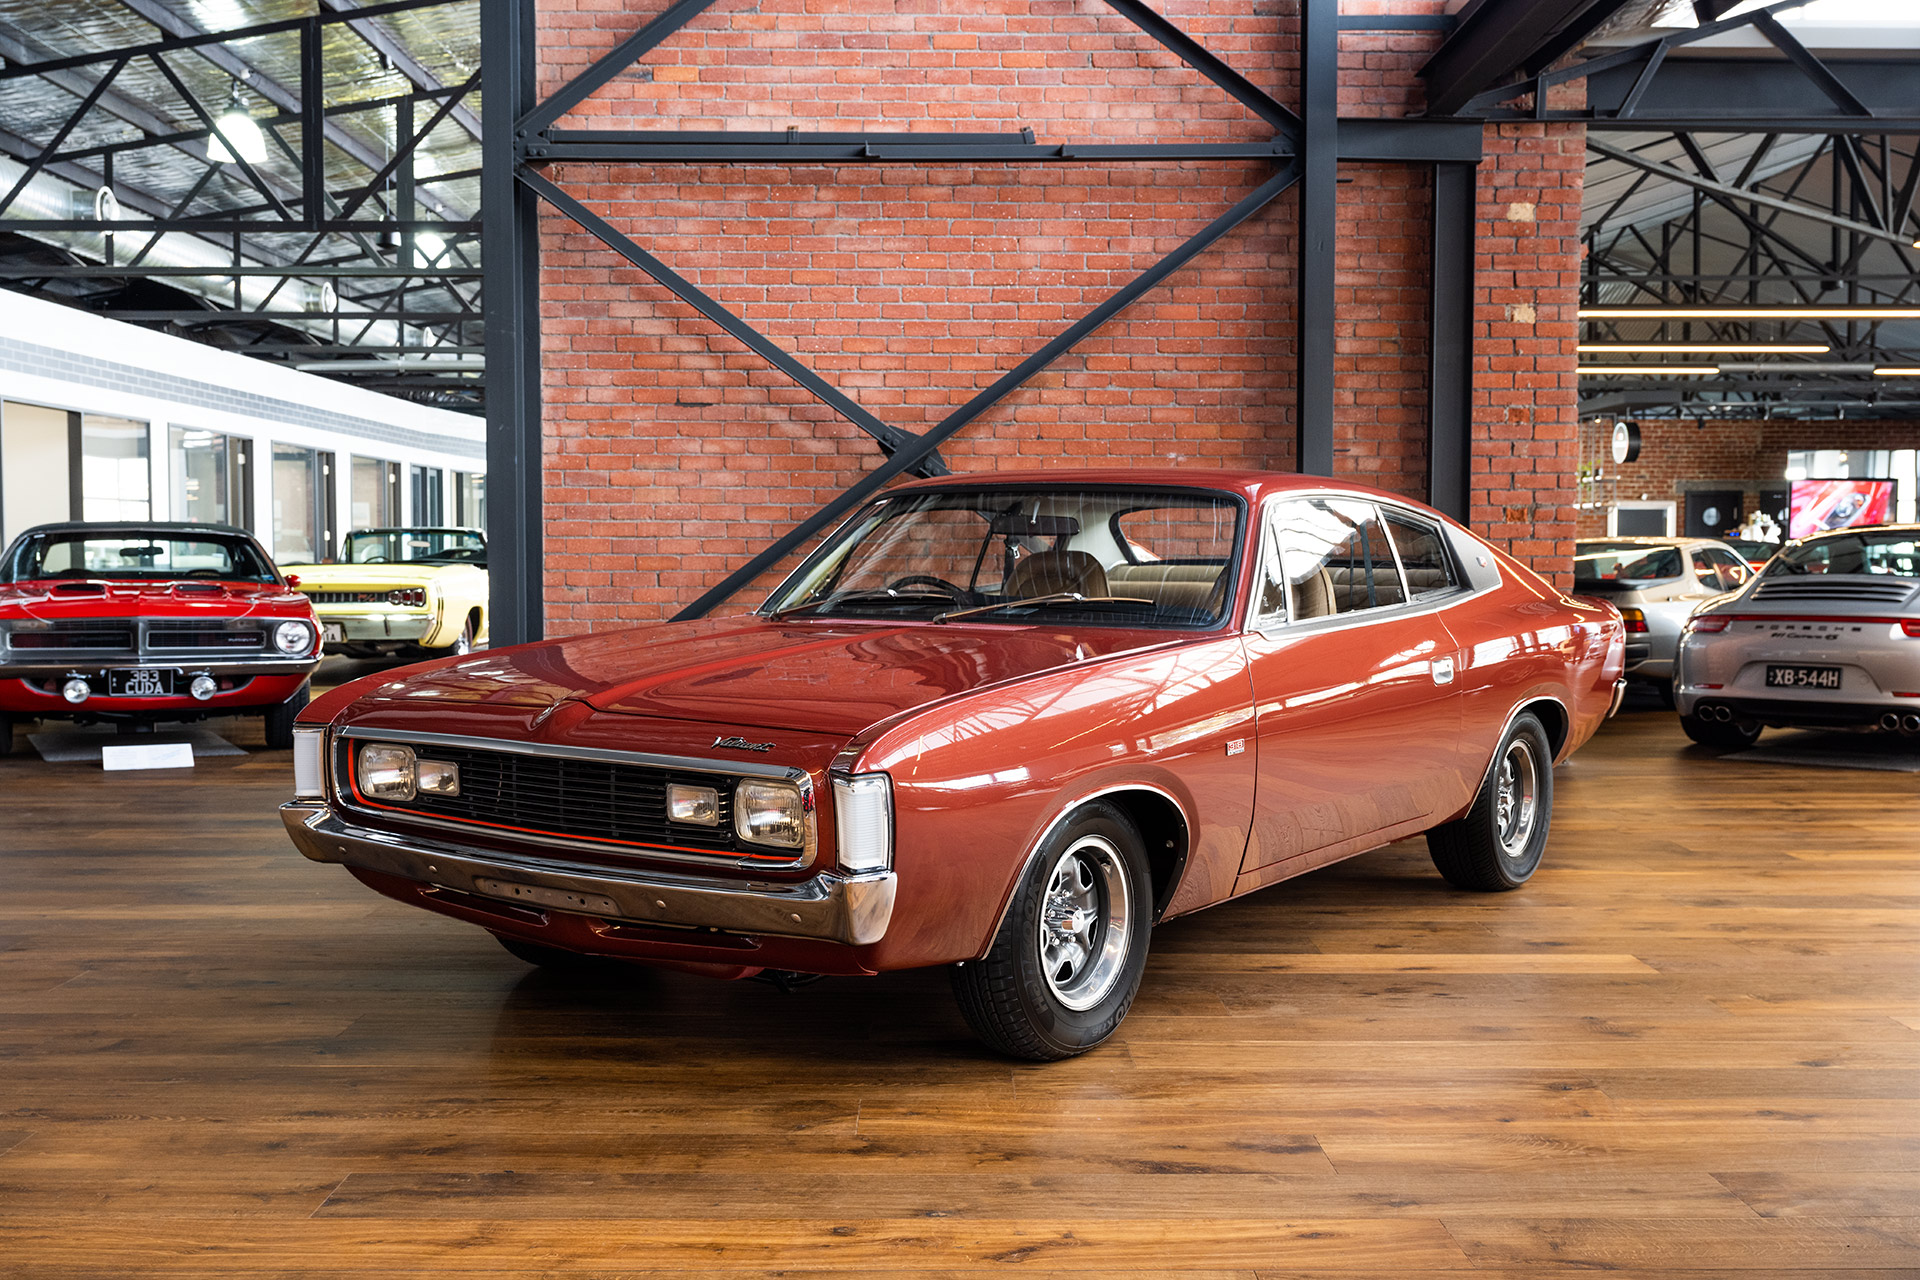 1971 Chrysler Valiant Charger 770 Manual - Richmonds - Classic and Prestige  Cars - Storage and Sales - Adelaide, Australia